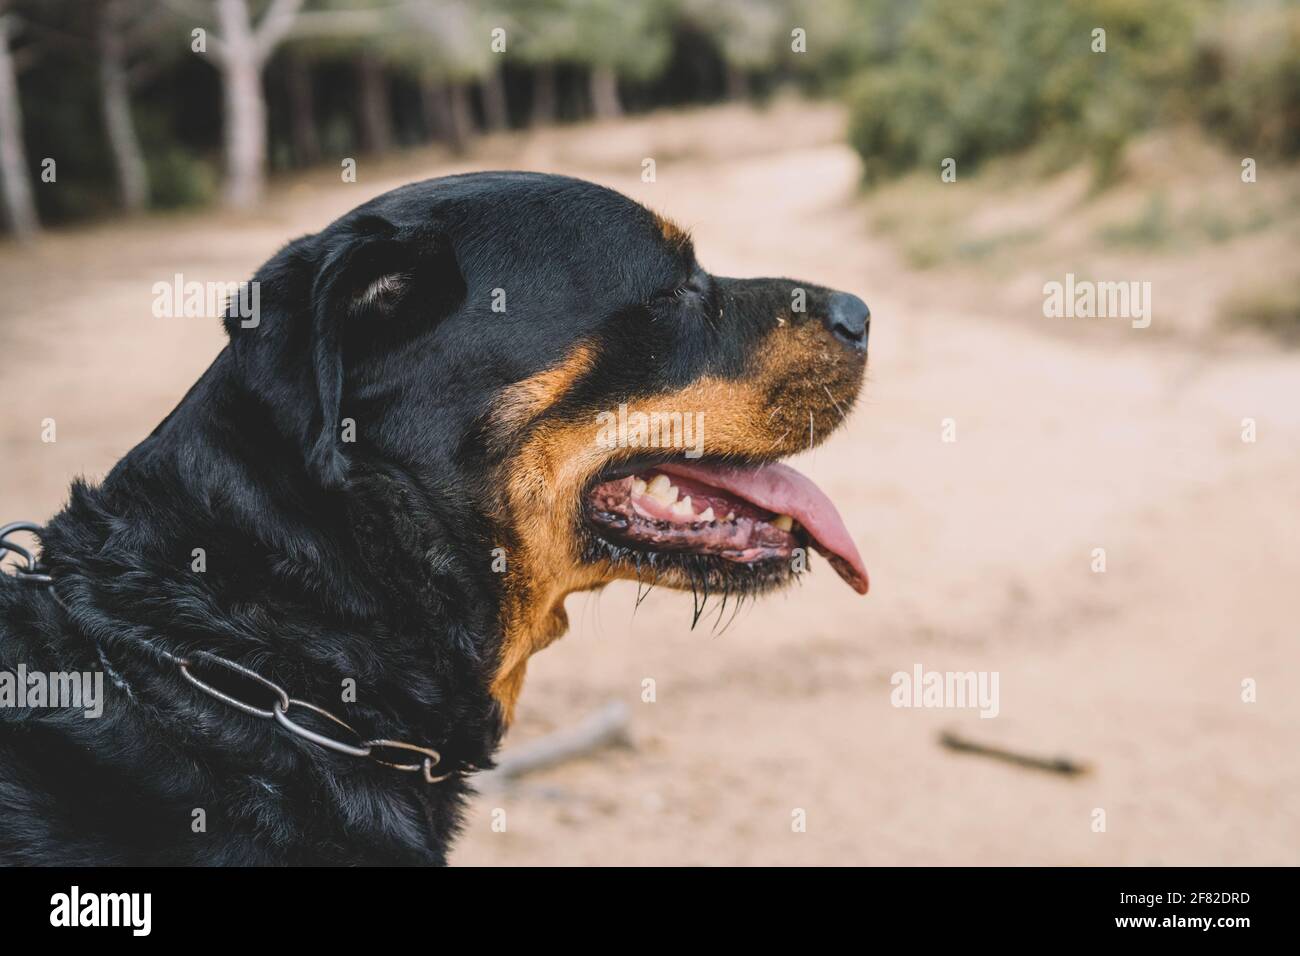 can a rottweiler be a hunting dog